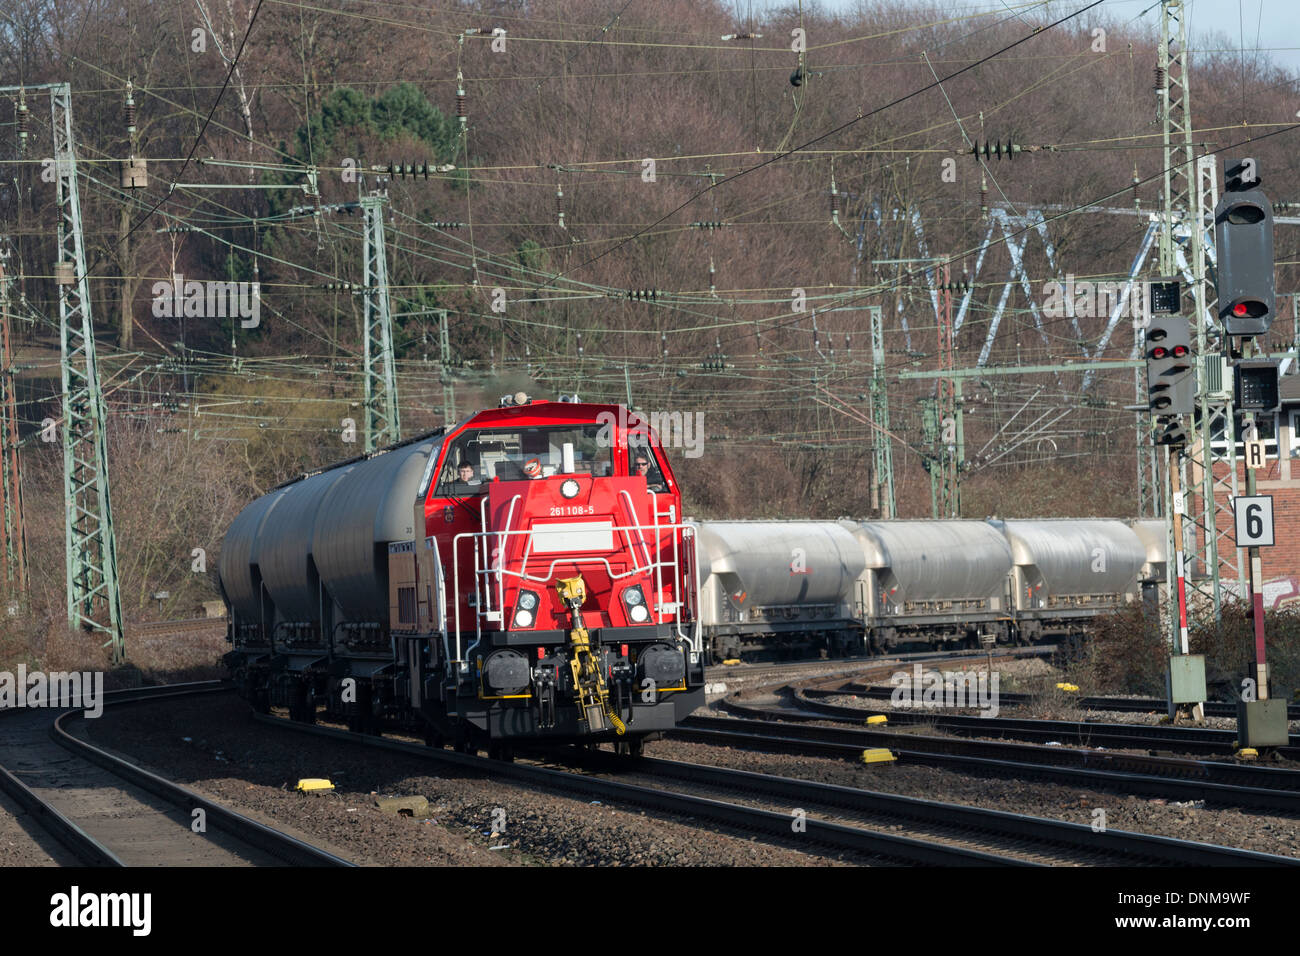 Freight train hauling tankers Stock Photo